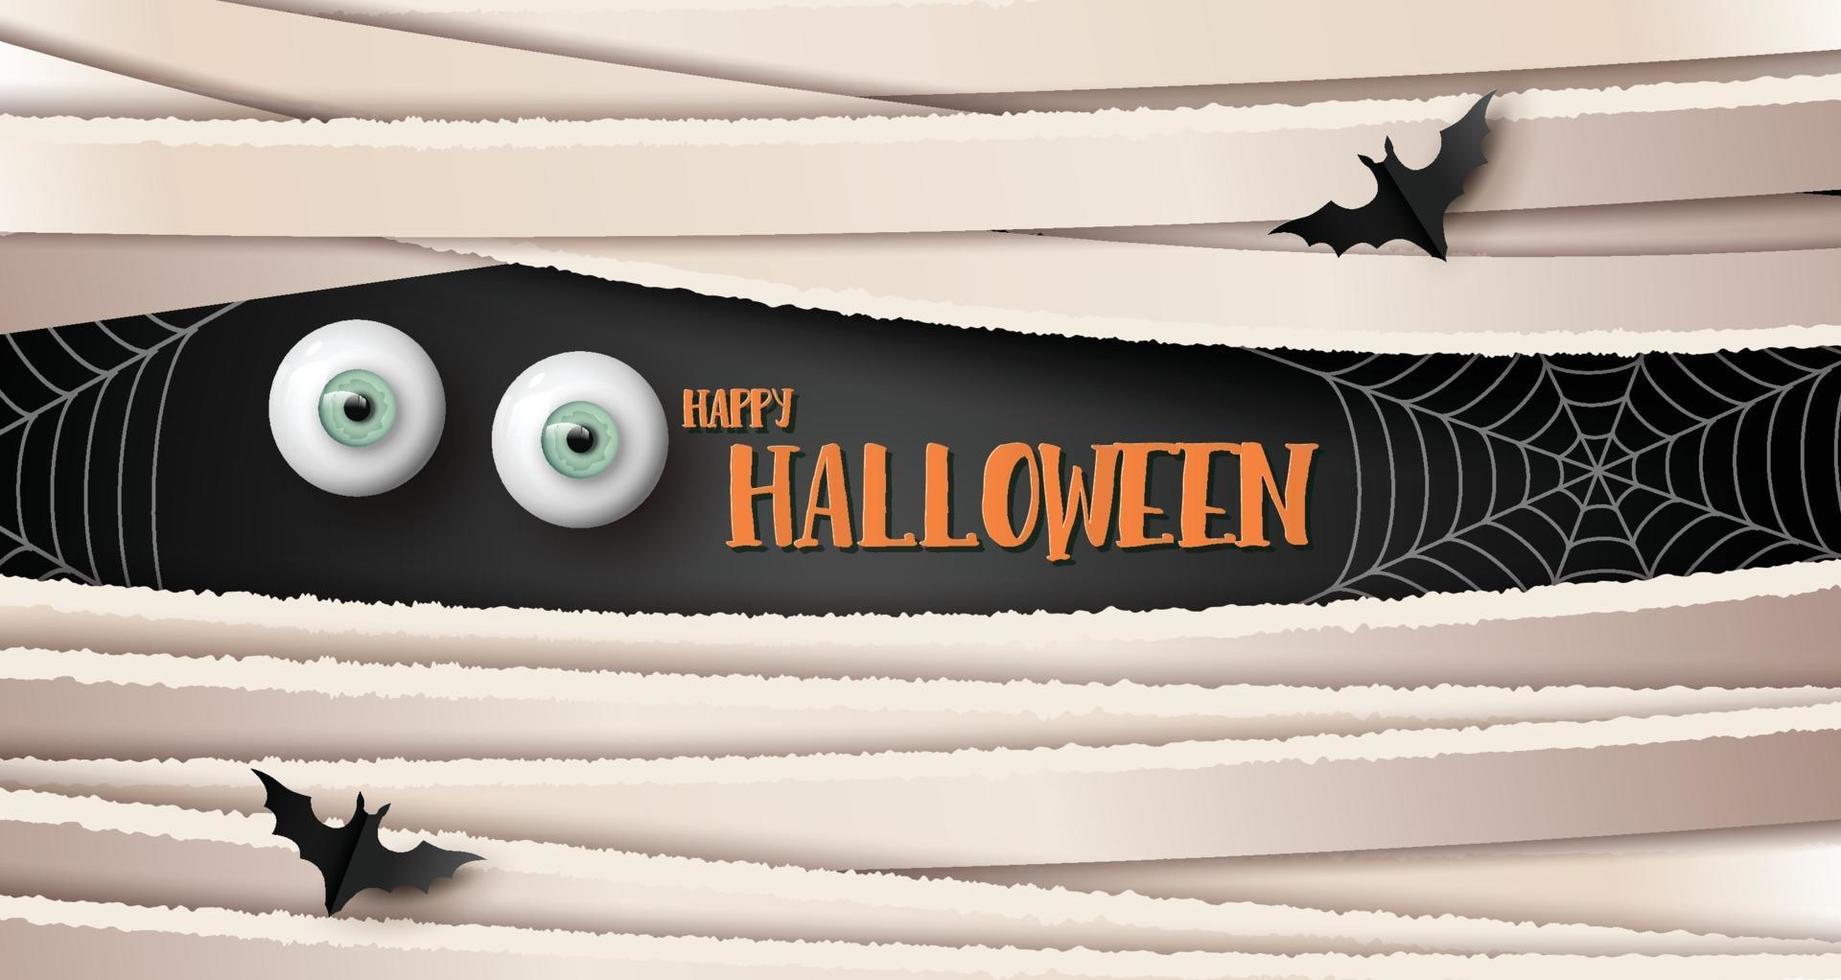 Happy Halloween greeting banner with eye and bats. Paper cut style. vector